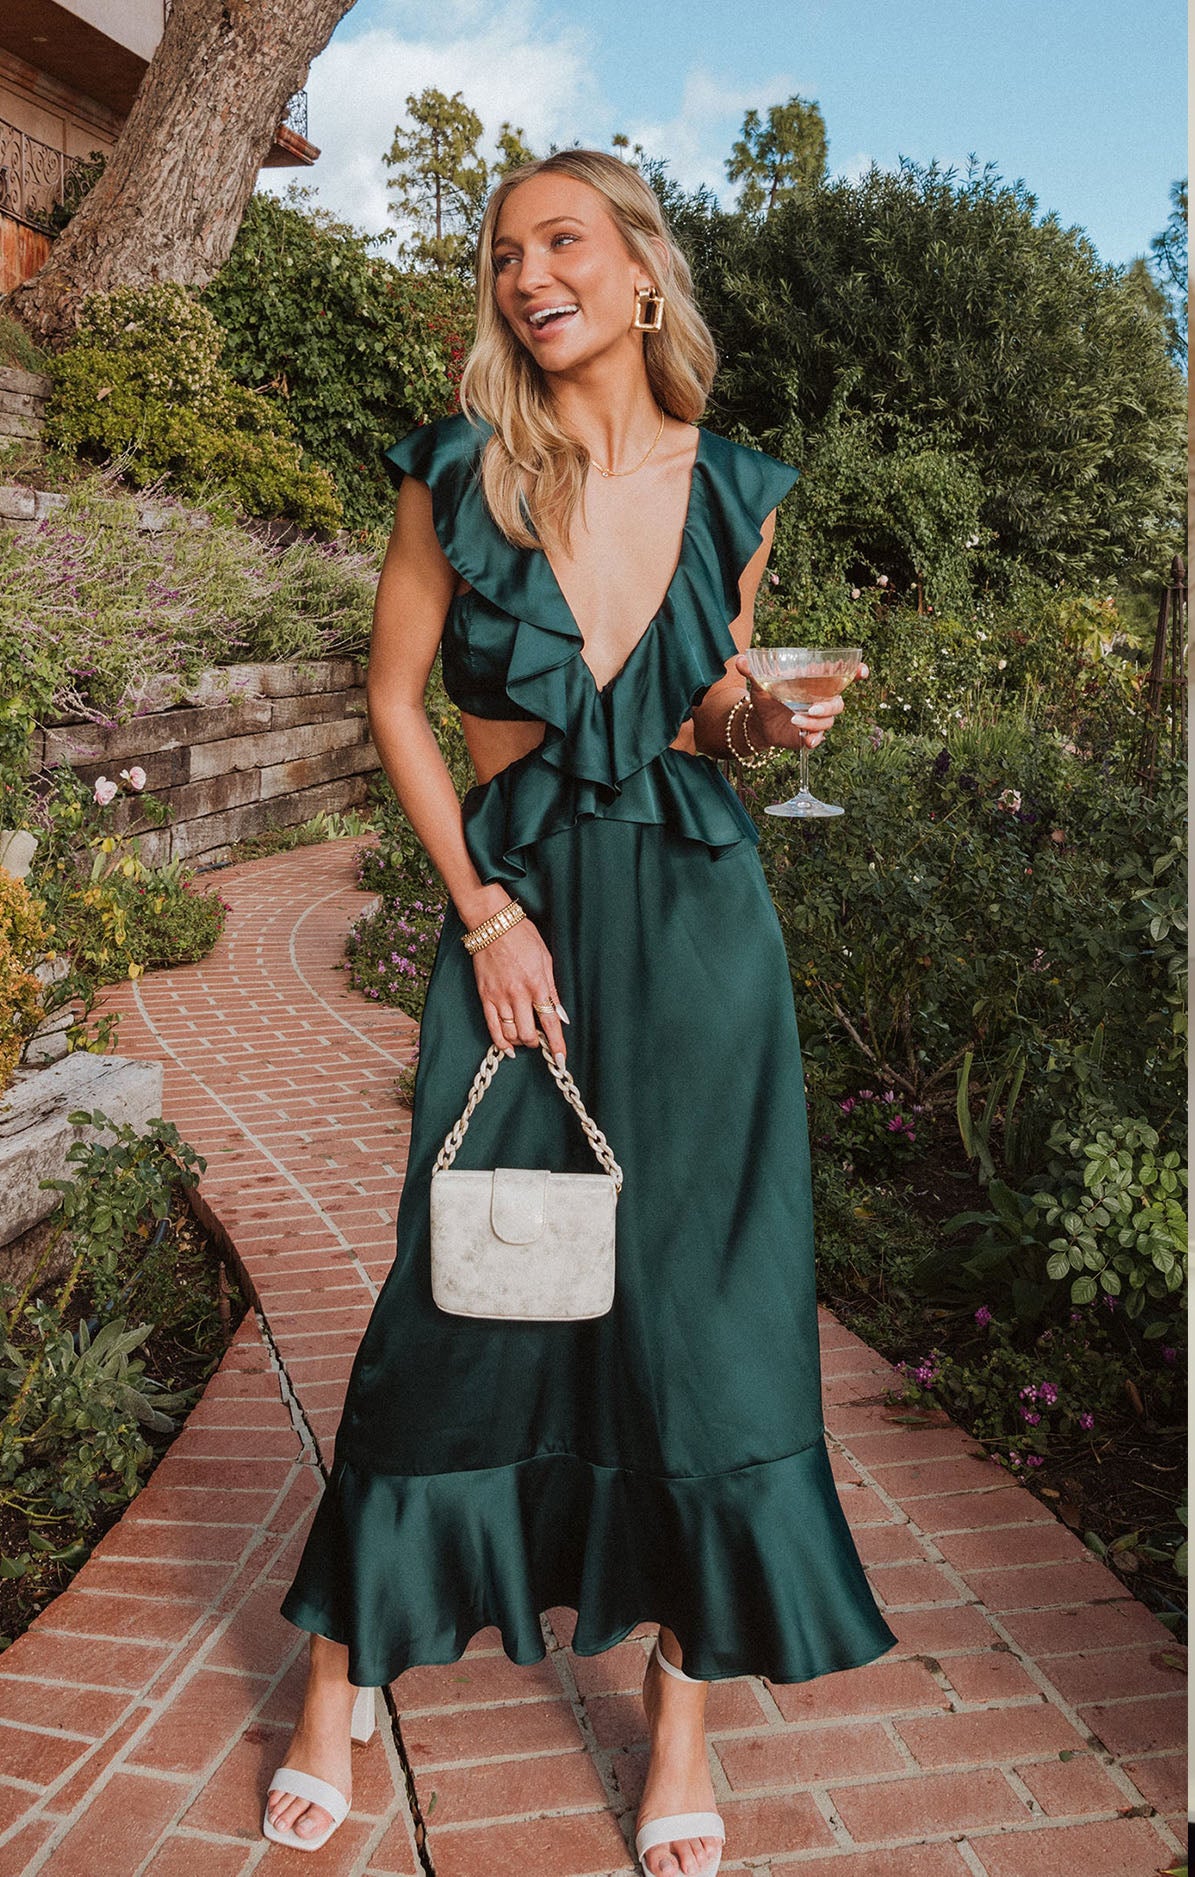 5 Wedding Guest Outfit Ideas That Will Turn Heads – Show Me Your Mumu